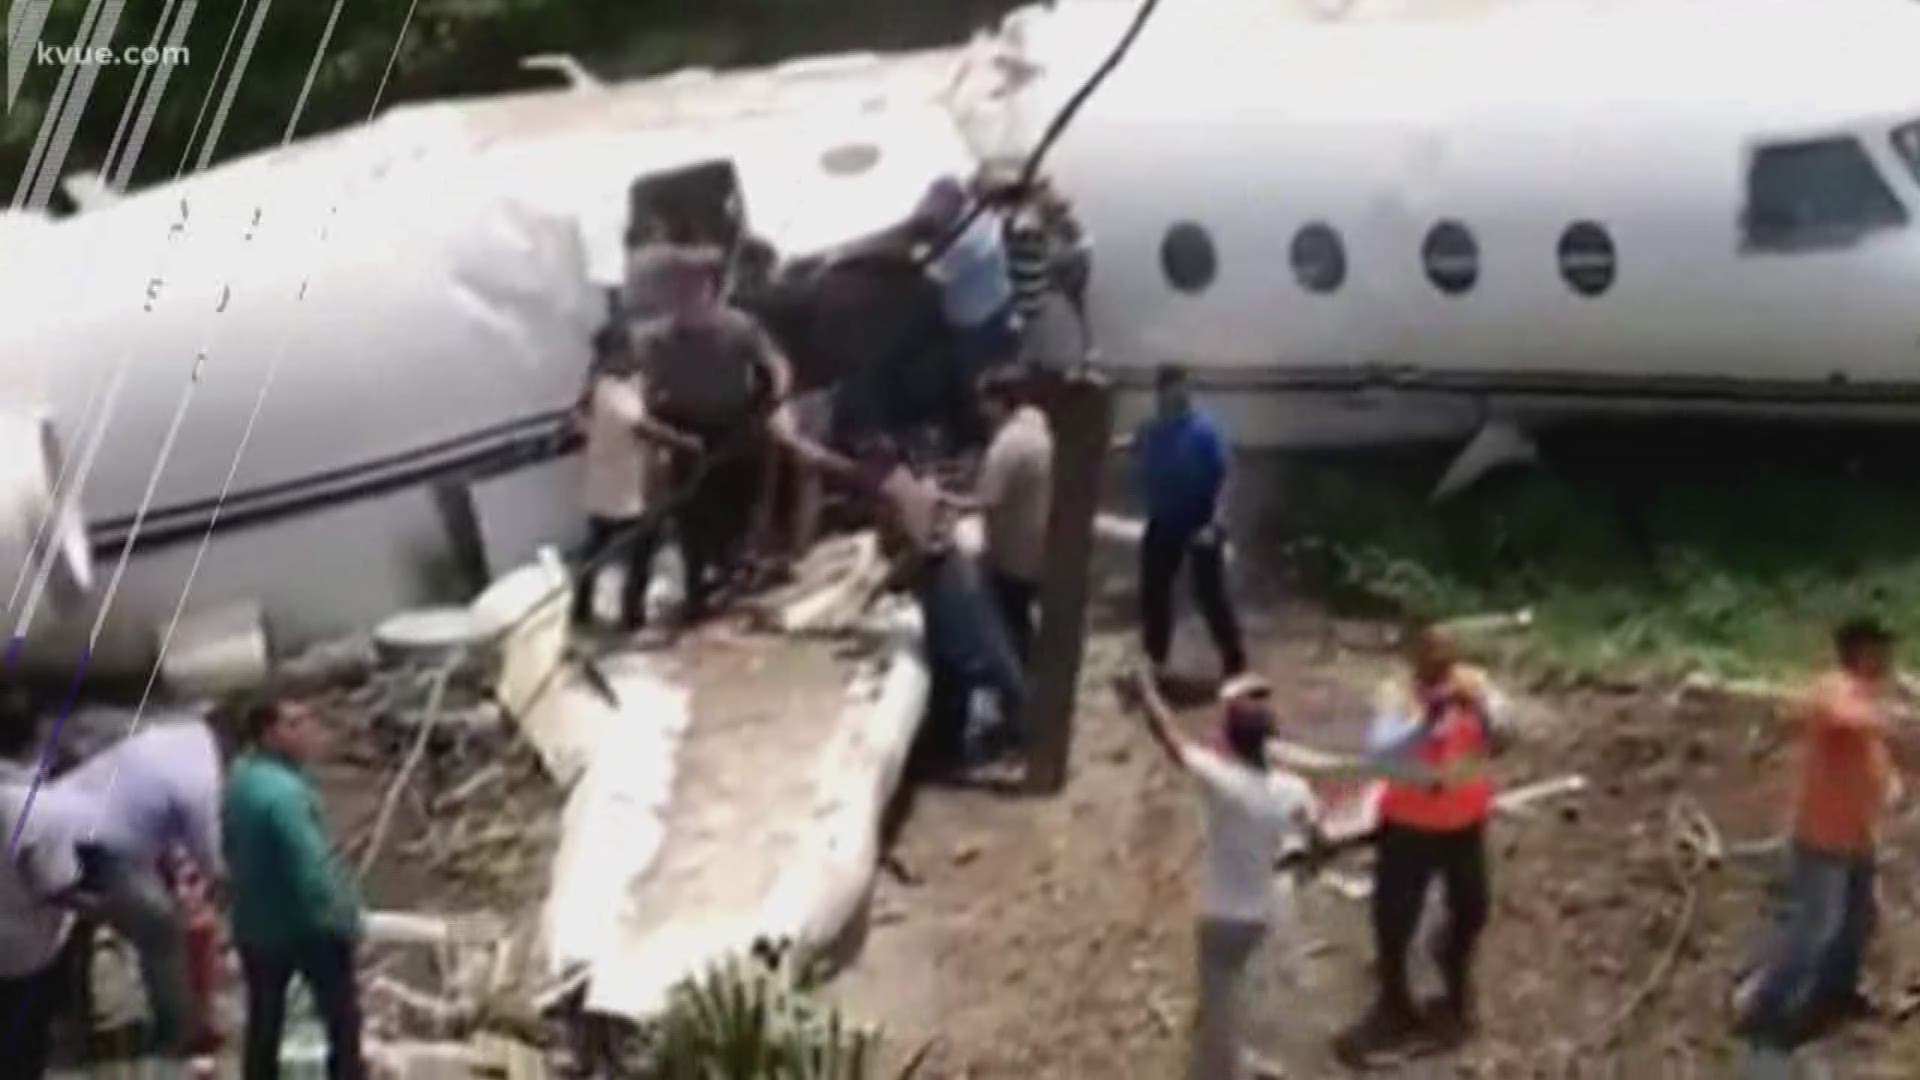 New video shows a private plane from Austin just moments before it came to a crashing stop at an airport in Honduras.